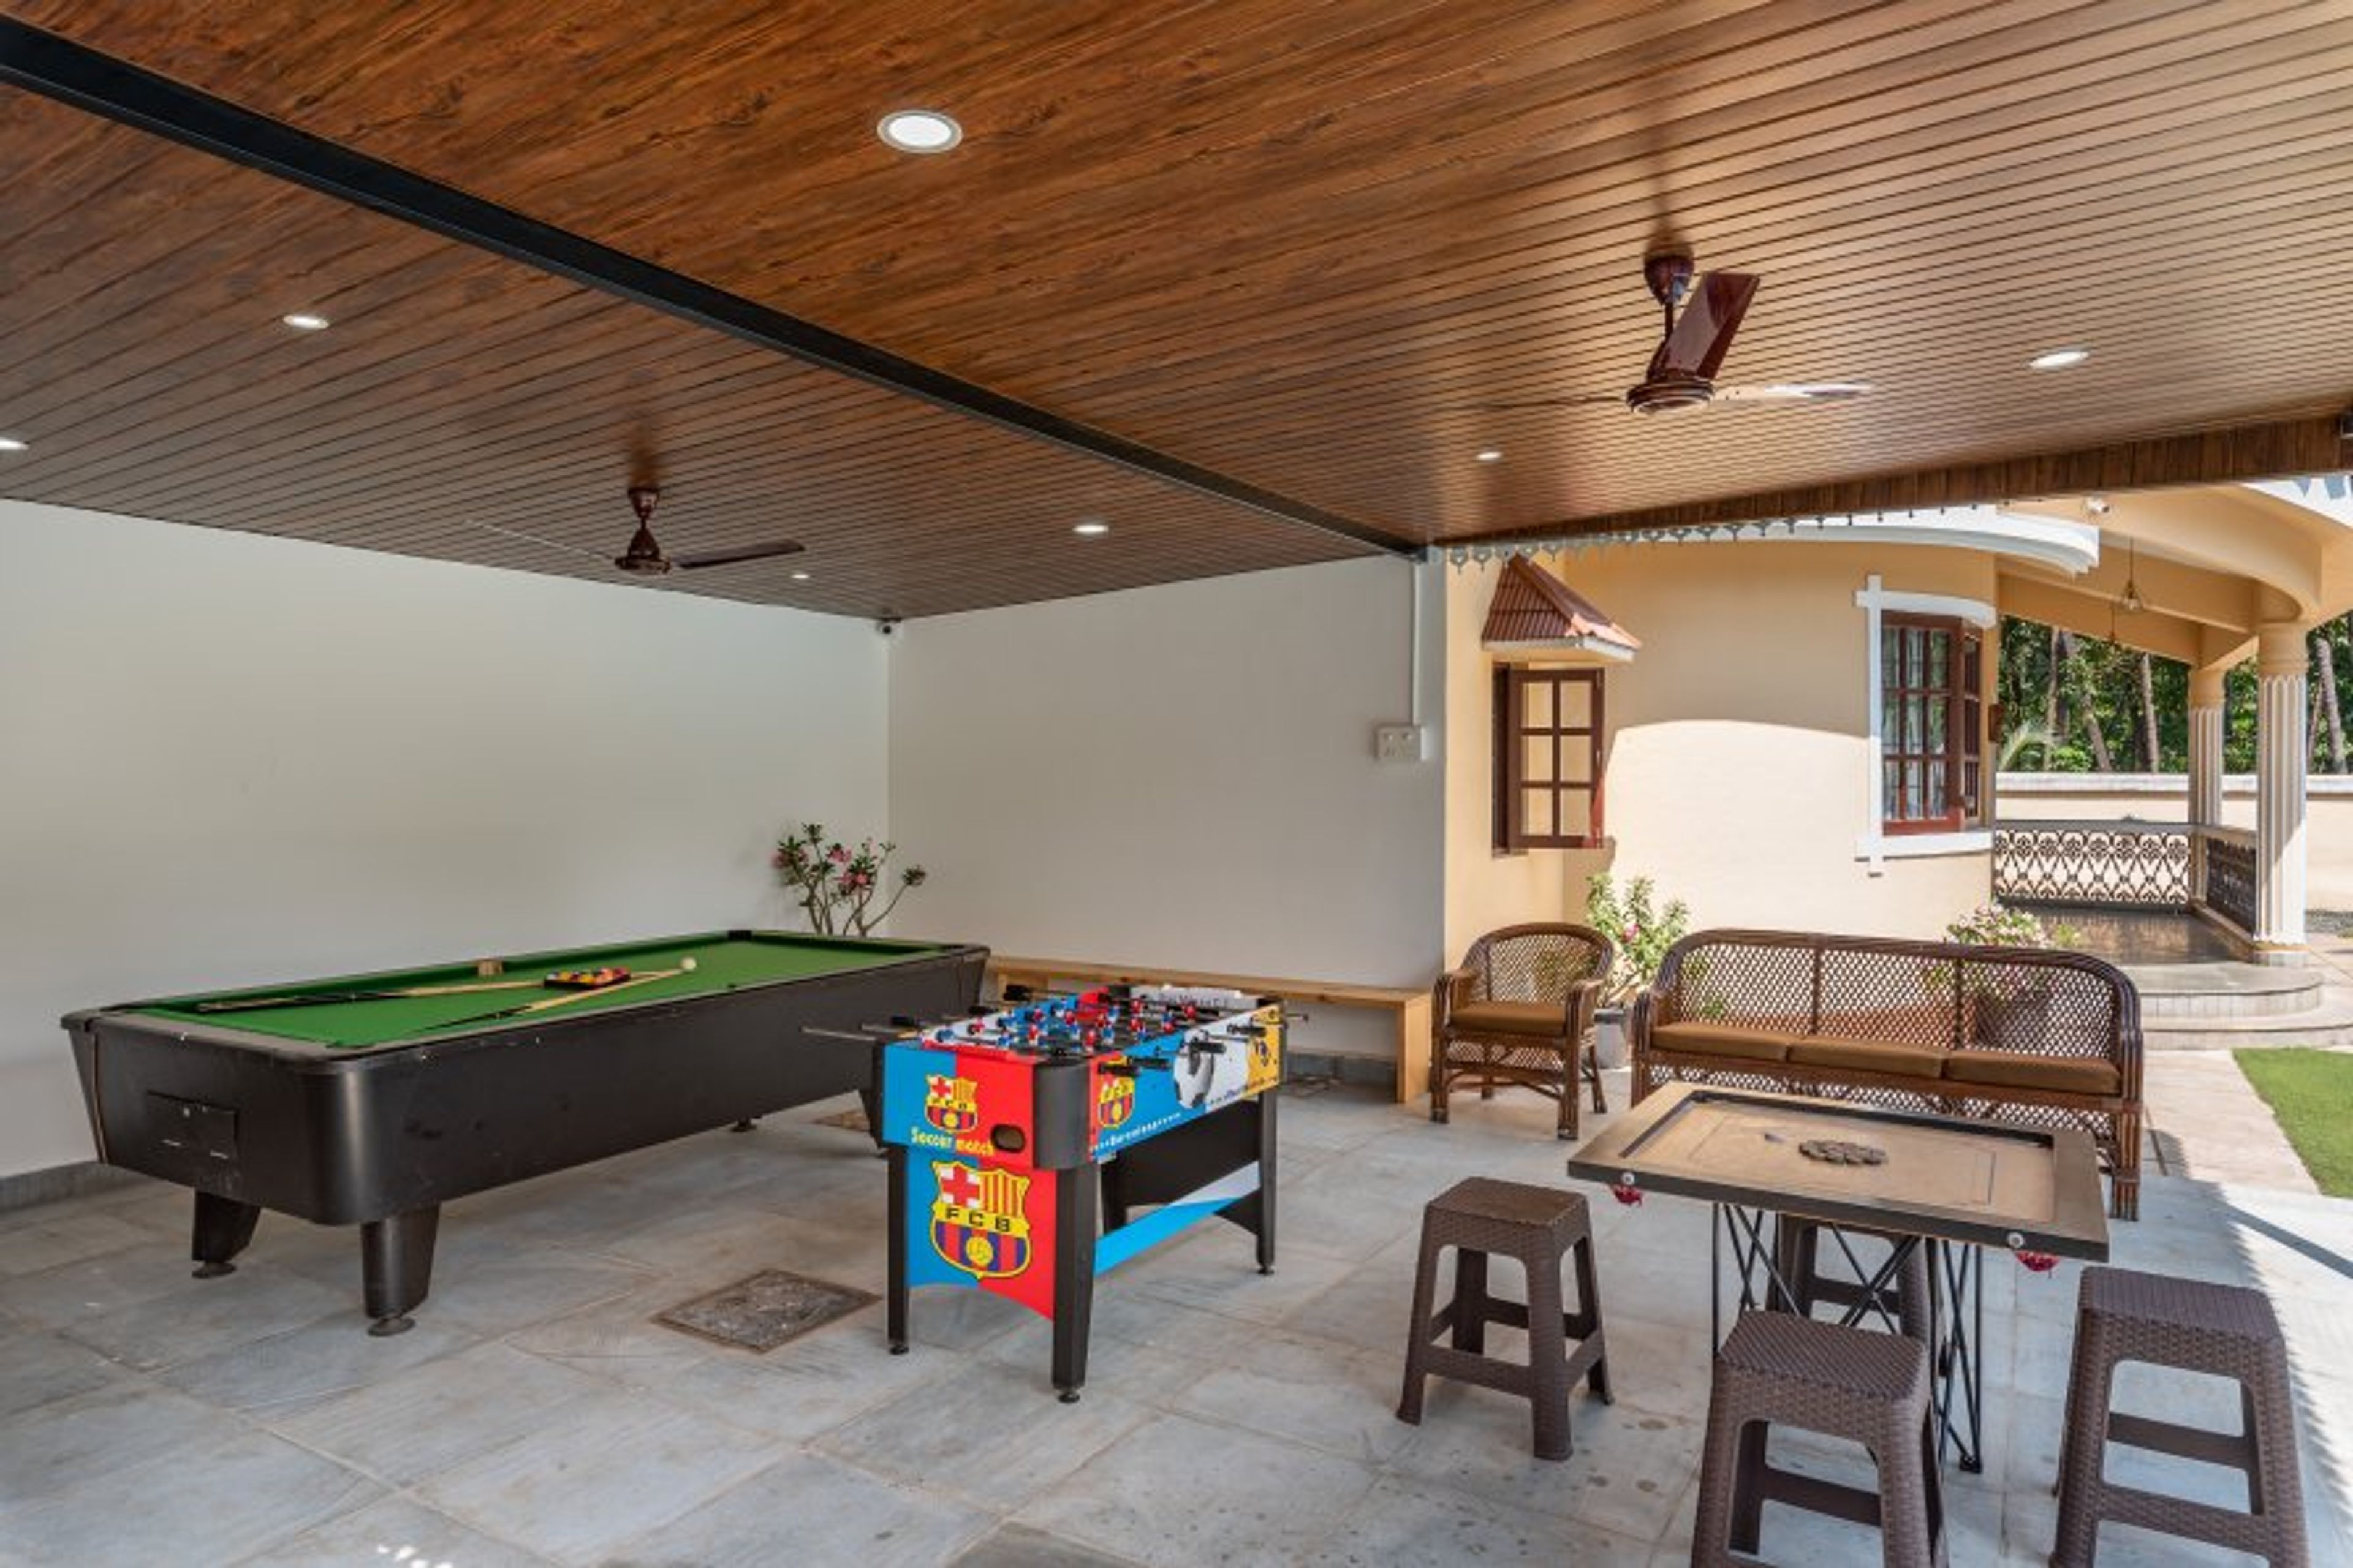 Amazing board games -- pool table, carrom and foosball